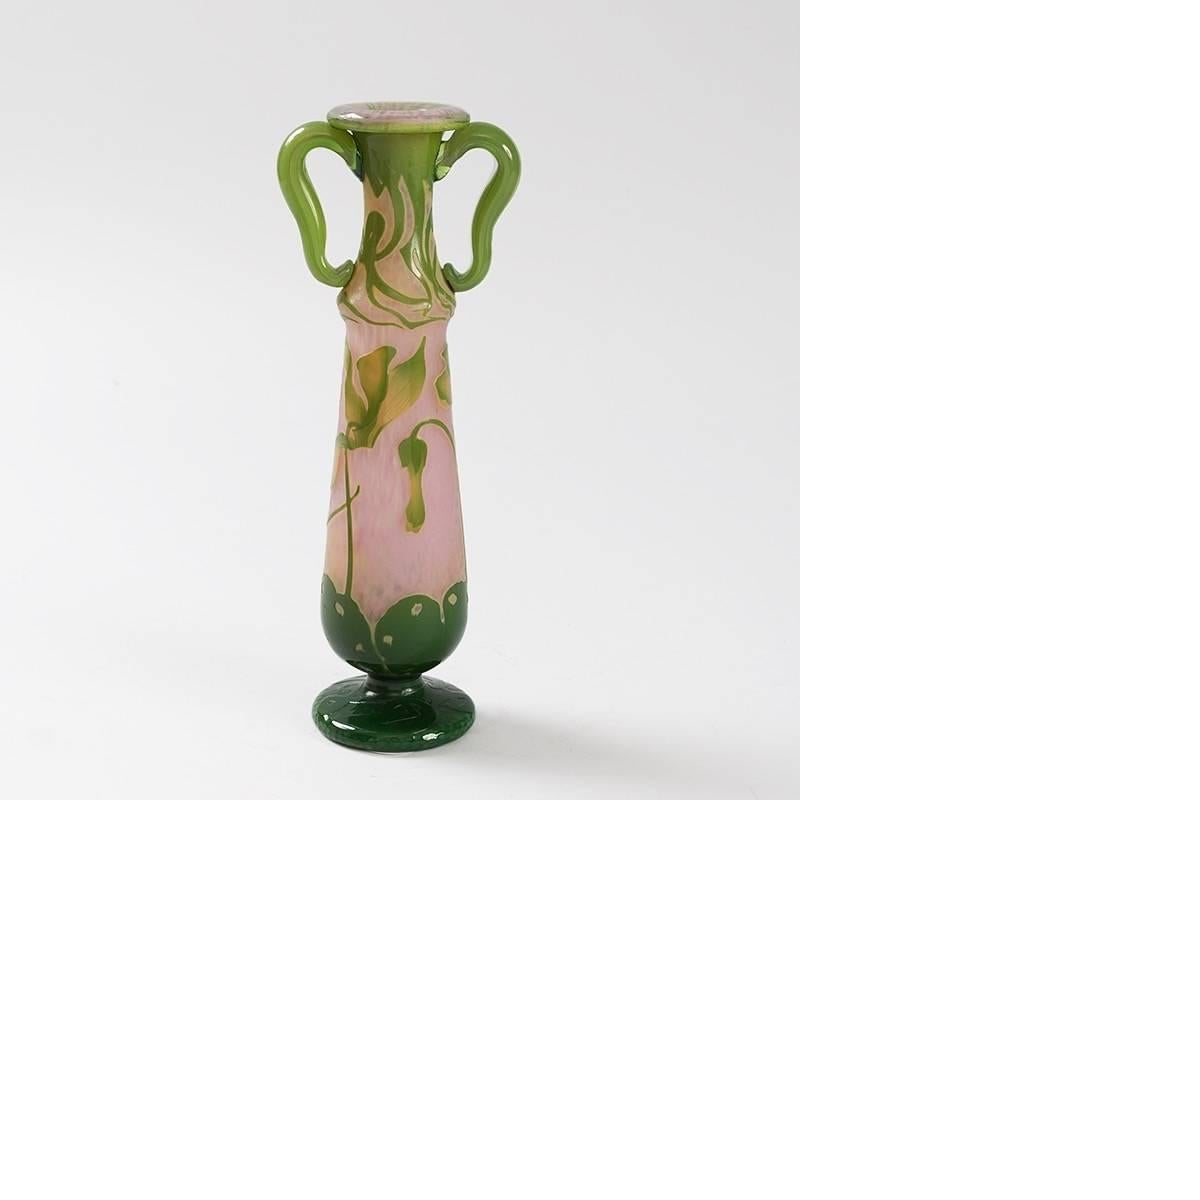 A French enameled and etched glass vase with applied handles by Daum. The vase has a pink martelé background. There is carving on the dark green footed base. It is decorated with lighter green wheel-carved flowers and vines. Additional wheel-carved